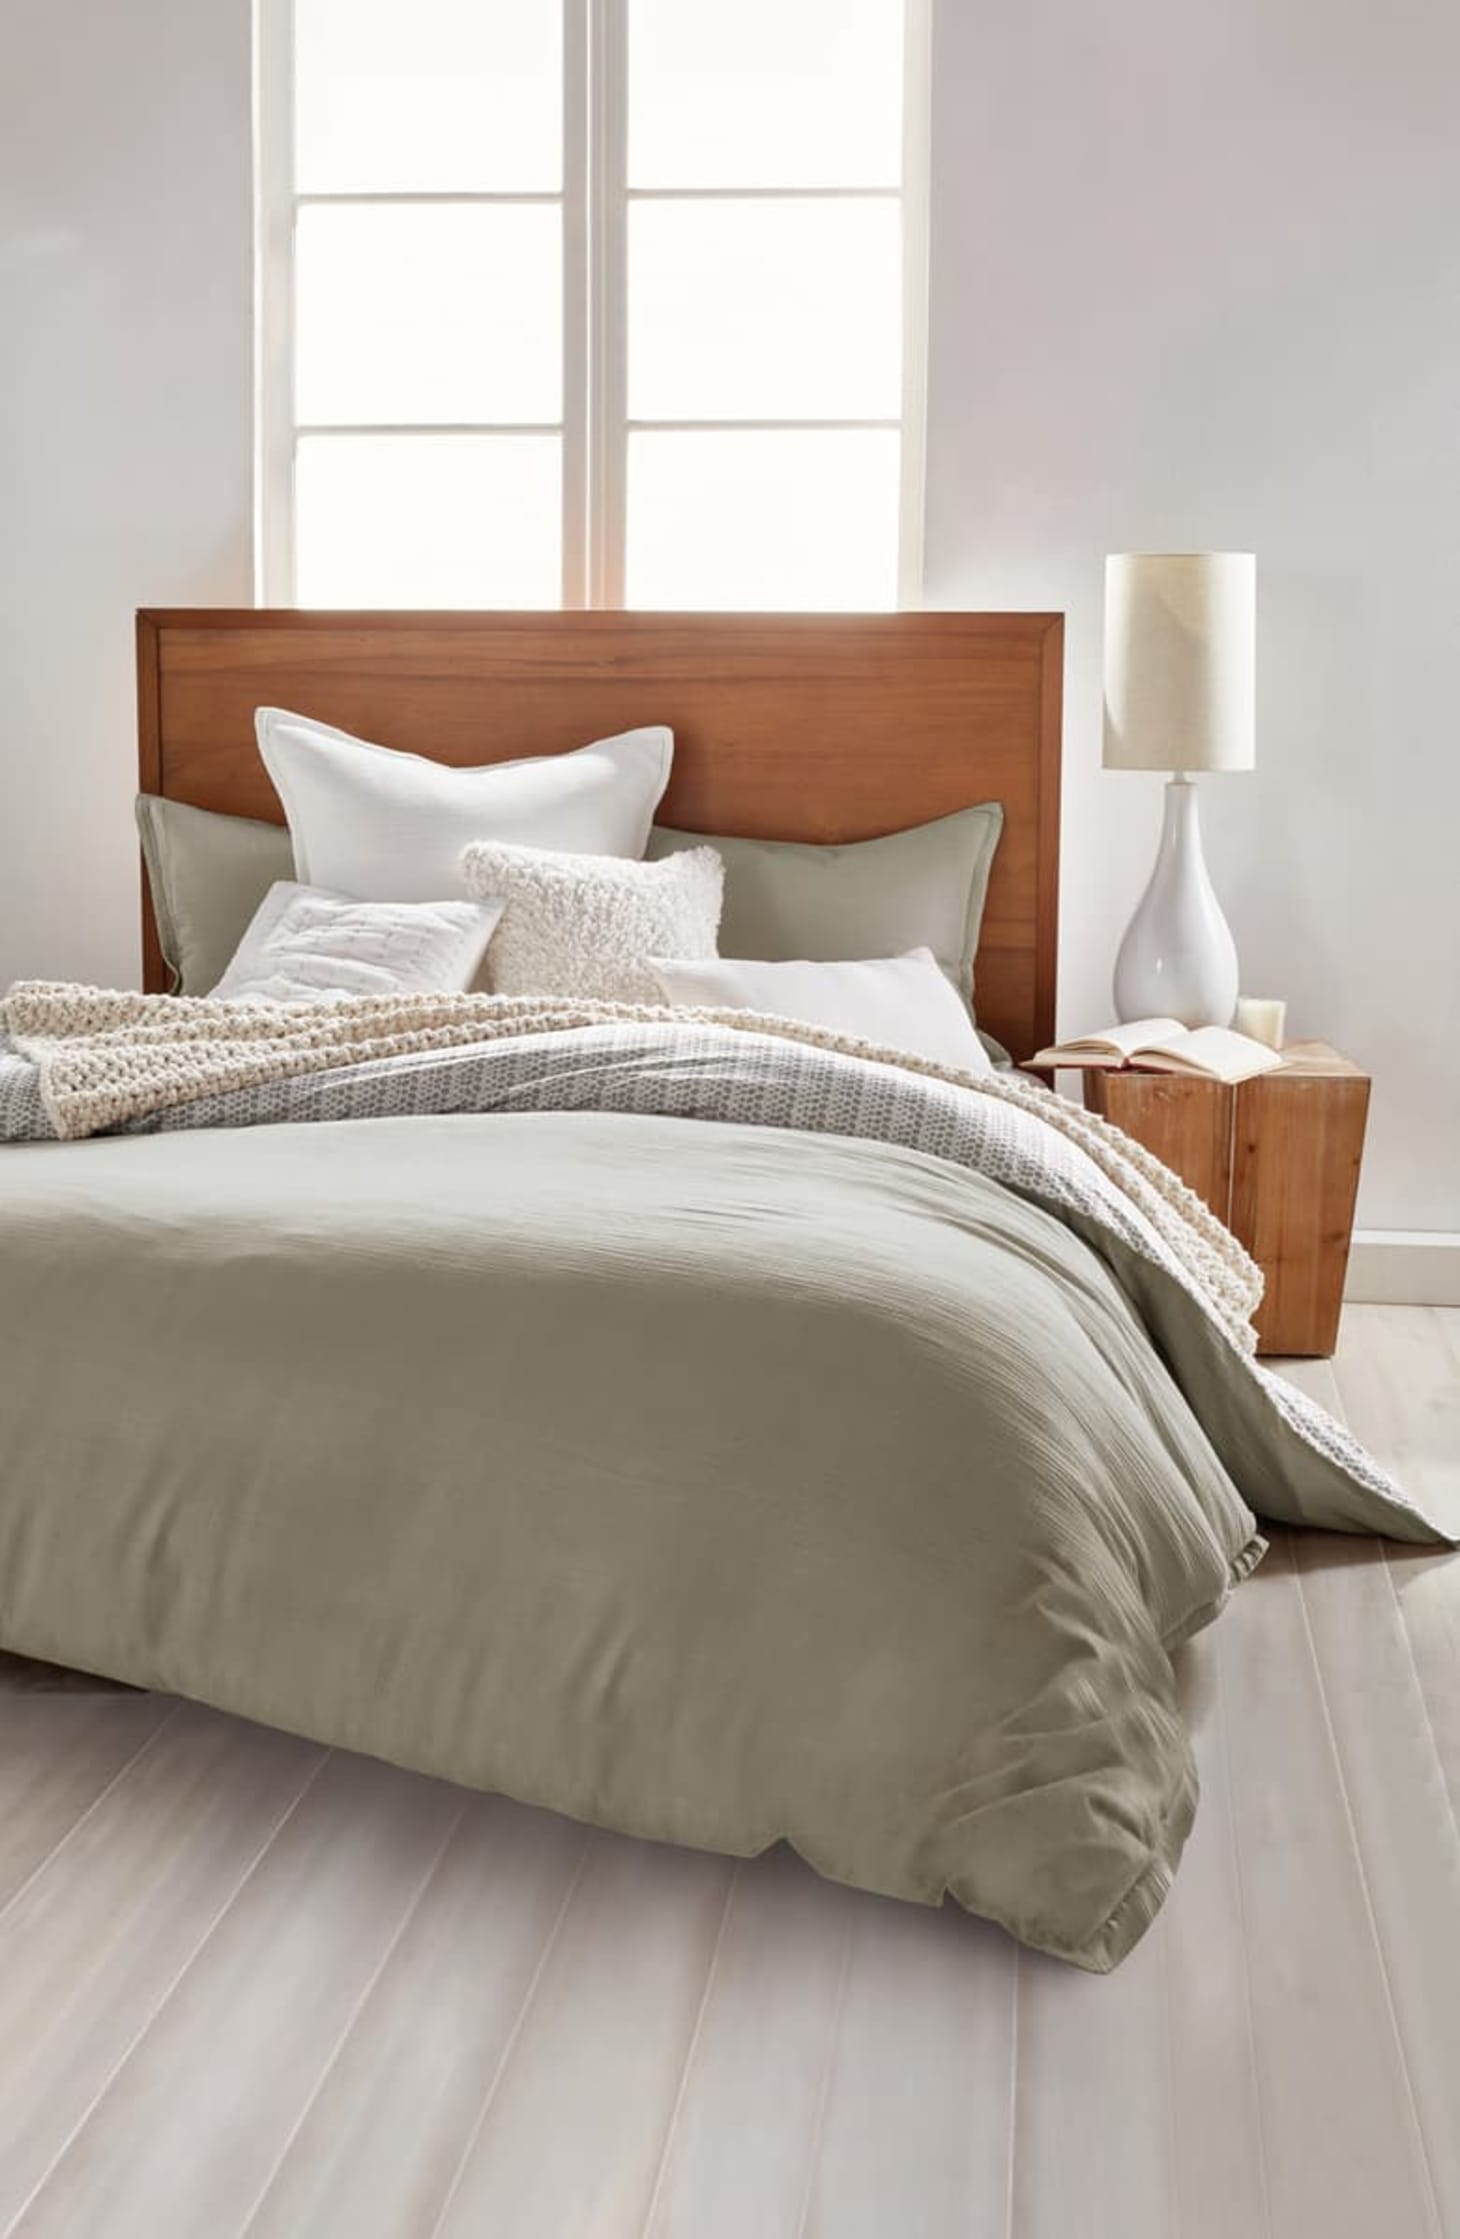 Nordstrom Bedding Spring Sale April 2020 Apartment Therapy